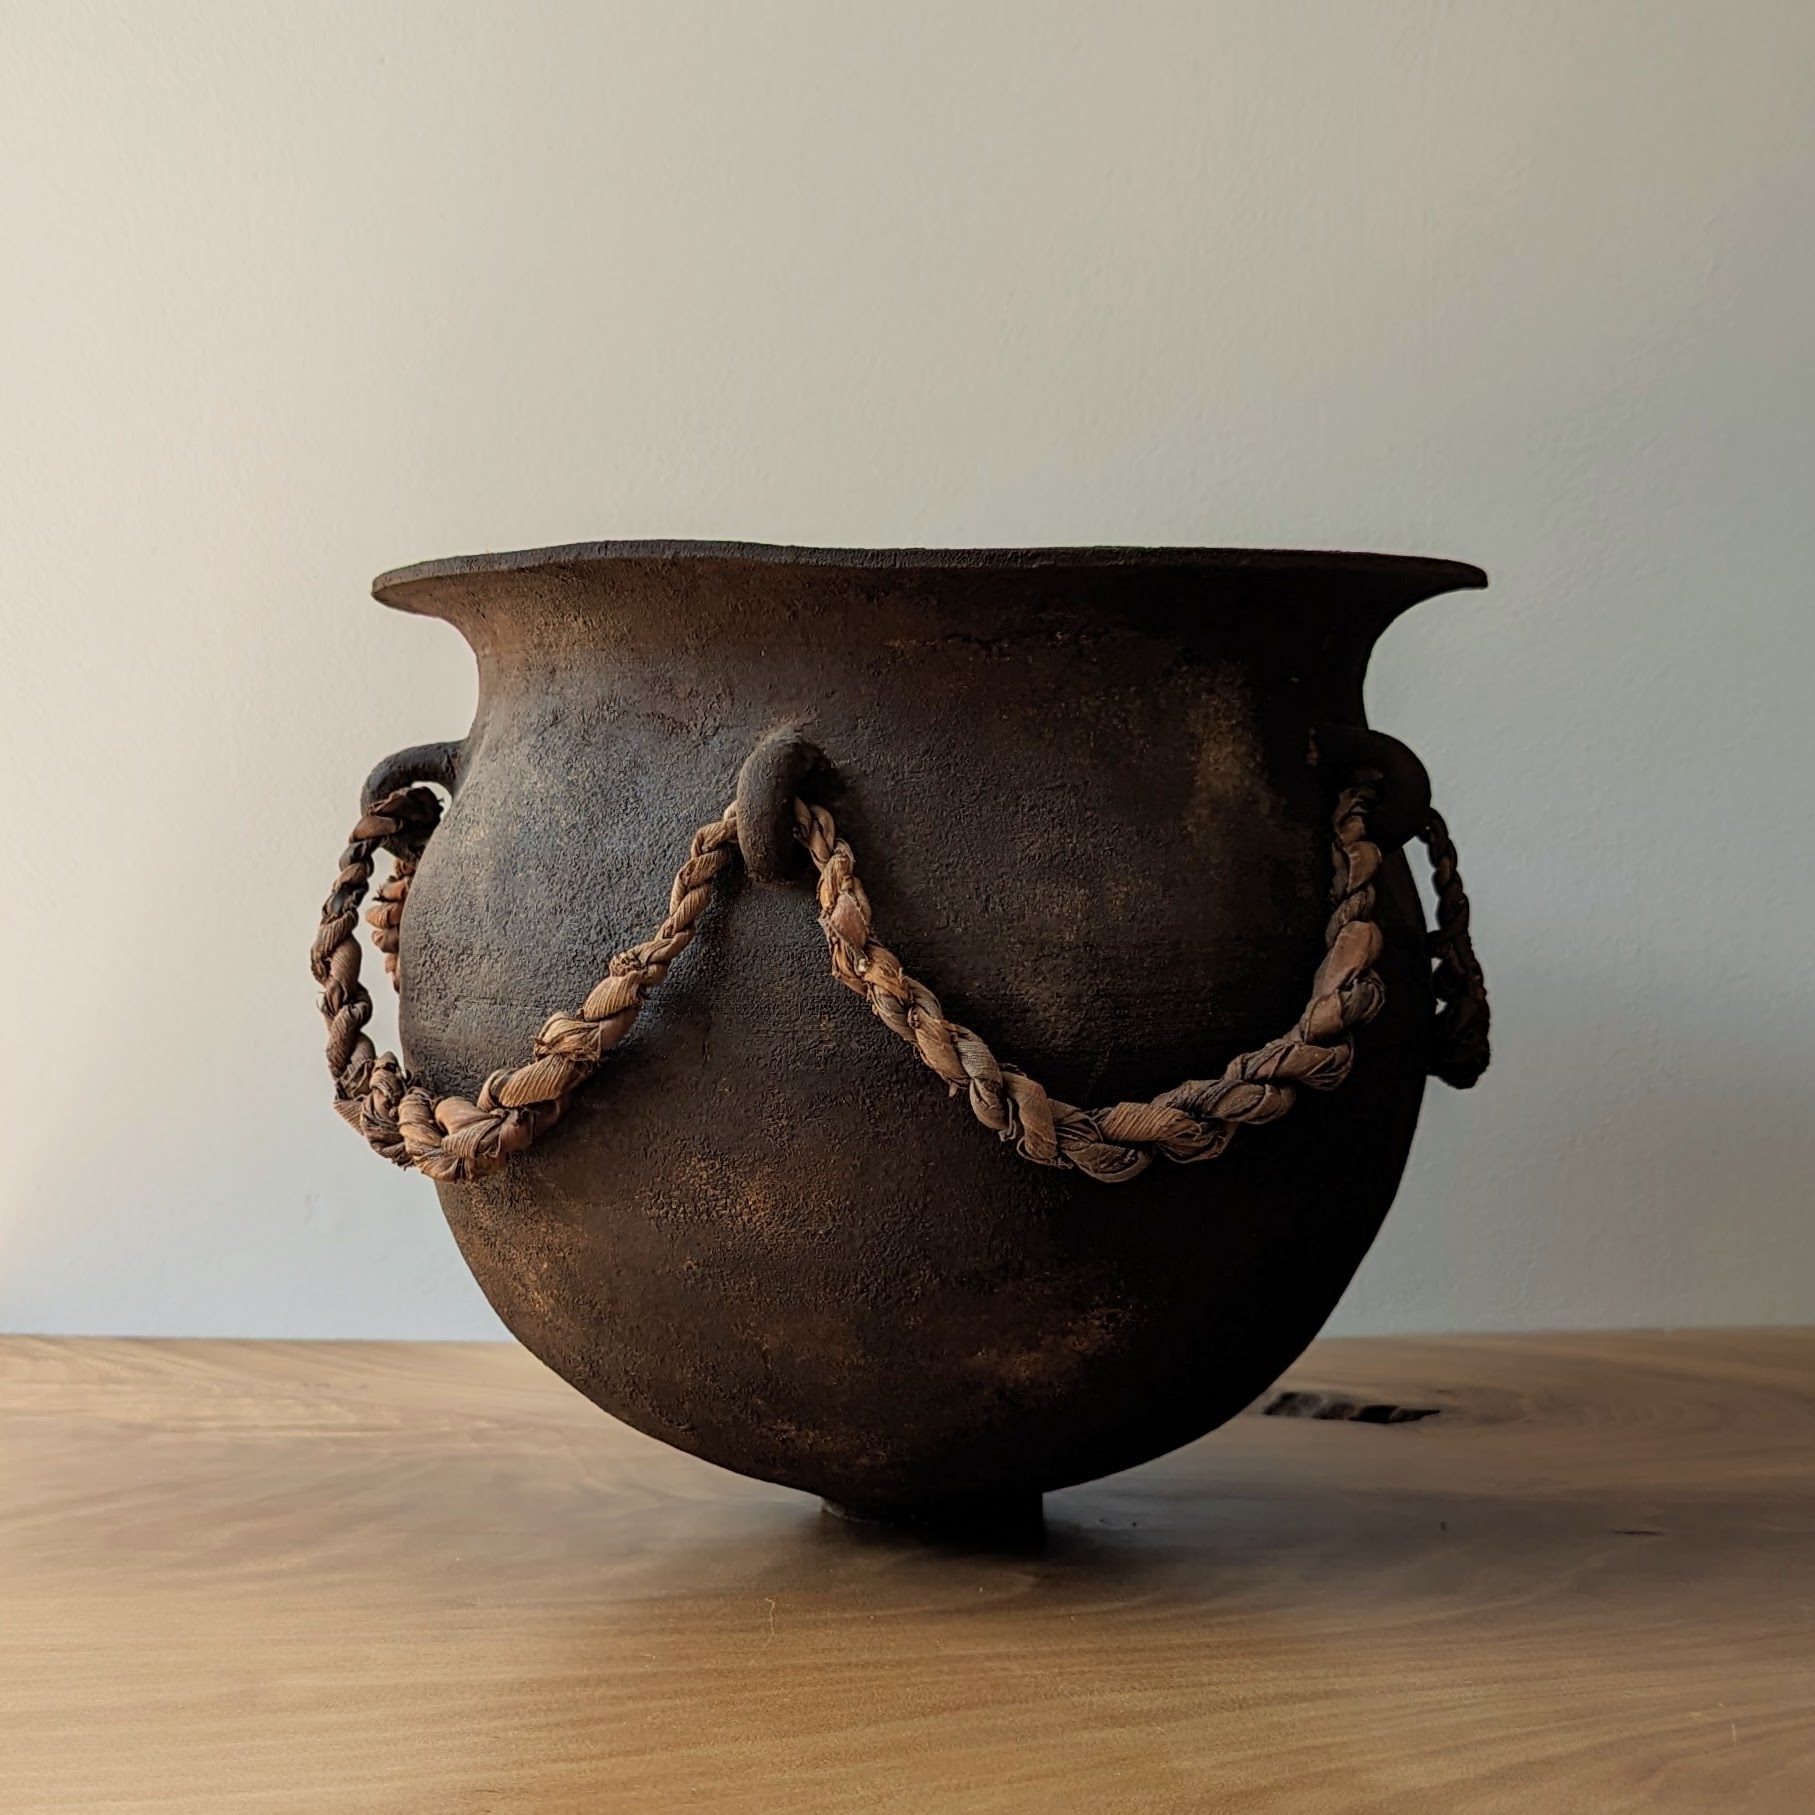 A carved wooden vessel with rope embellishments